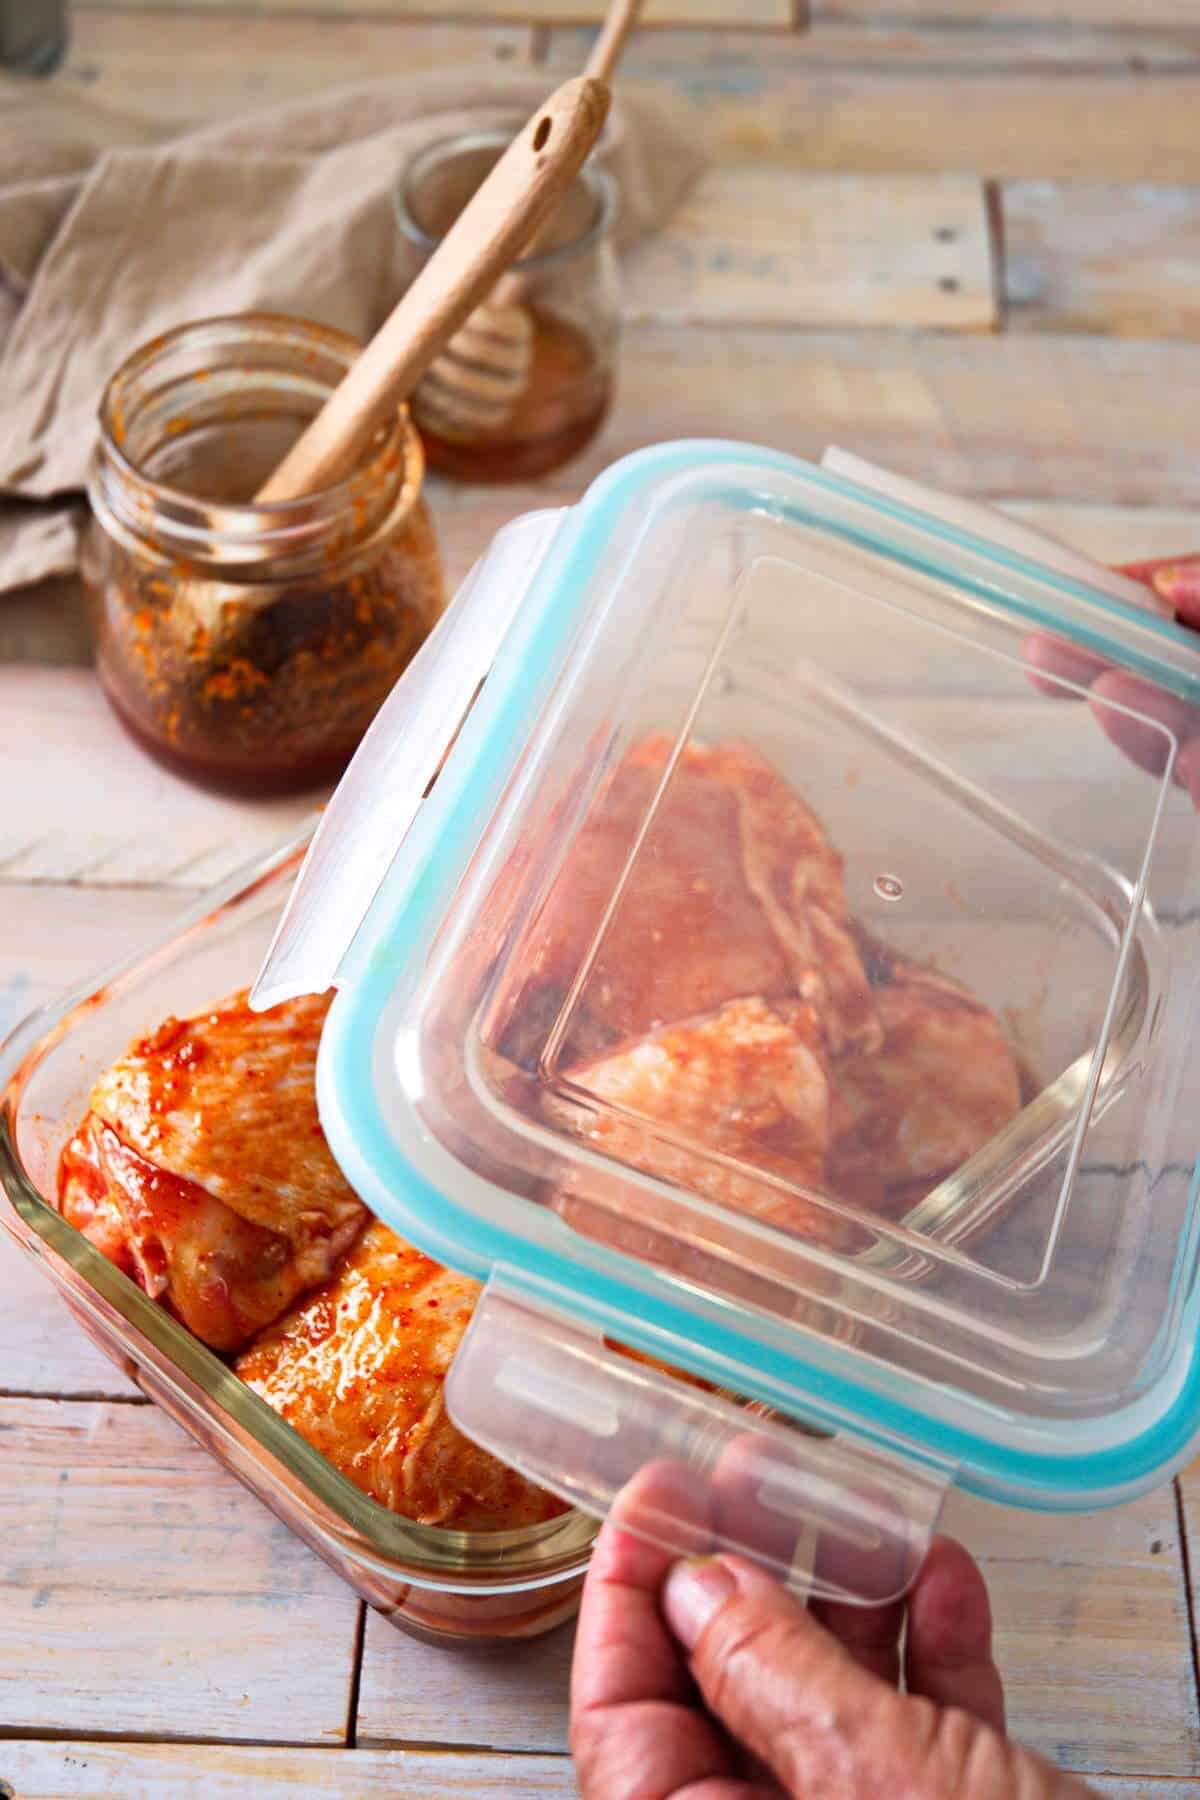 Chicken thighs in a marinade in glass container, wooden background.